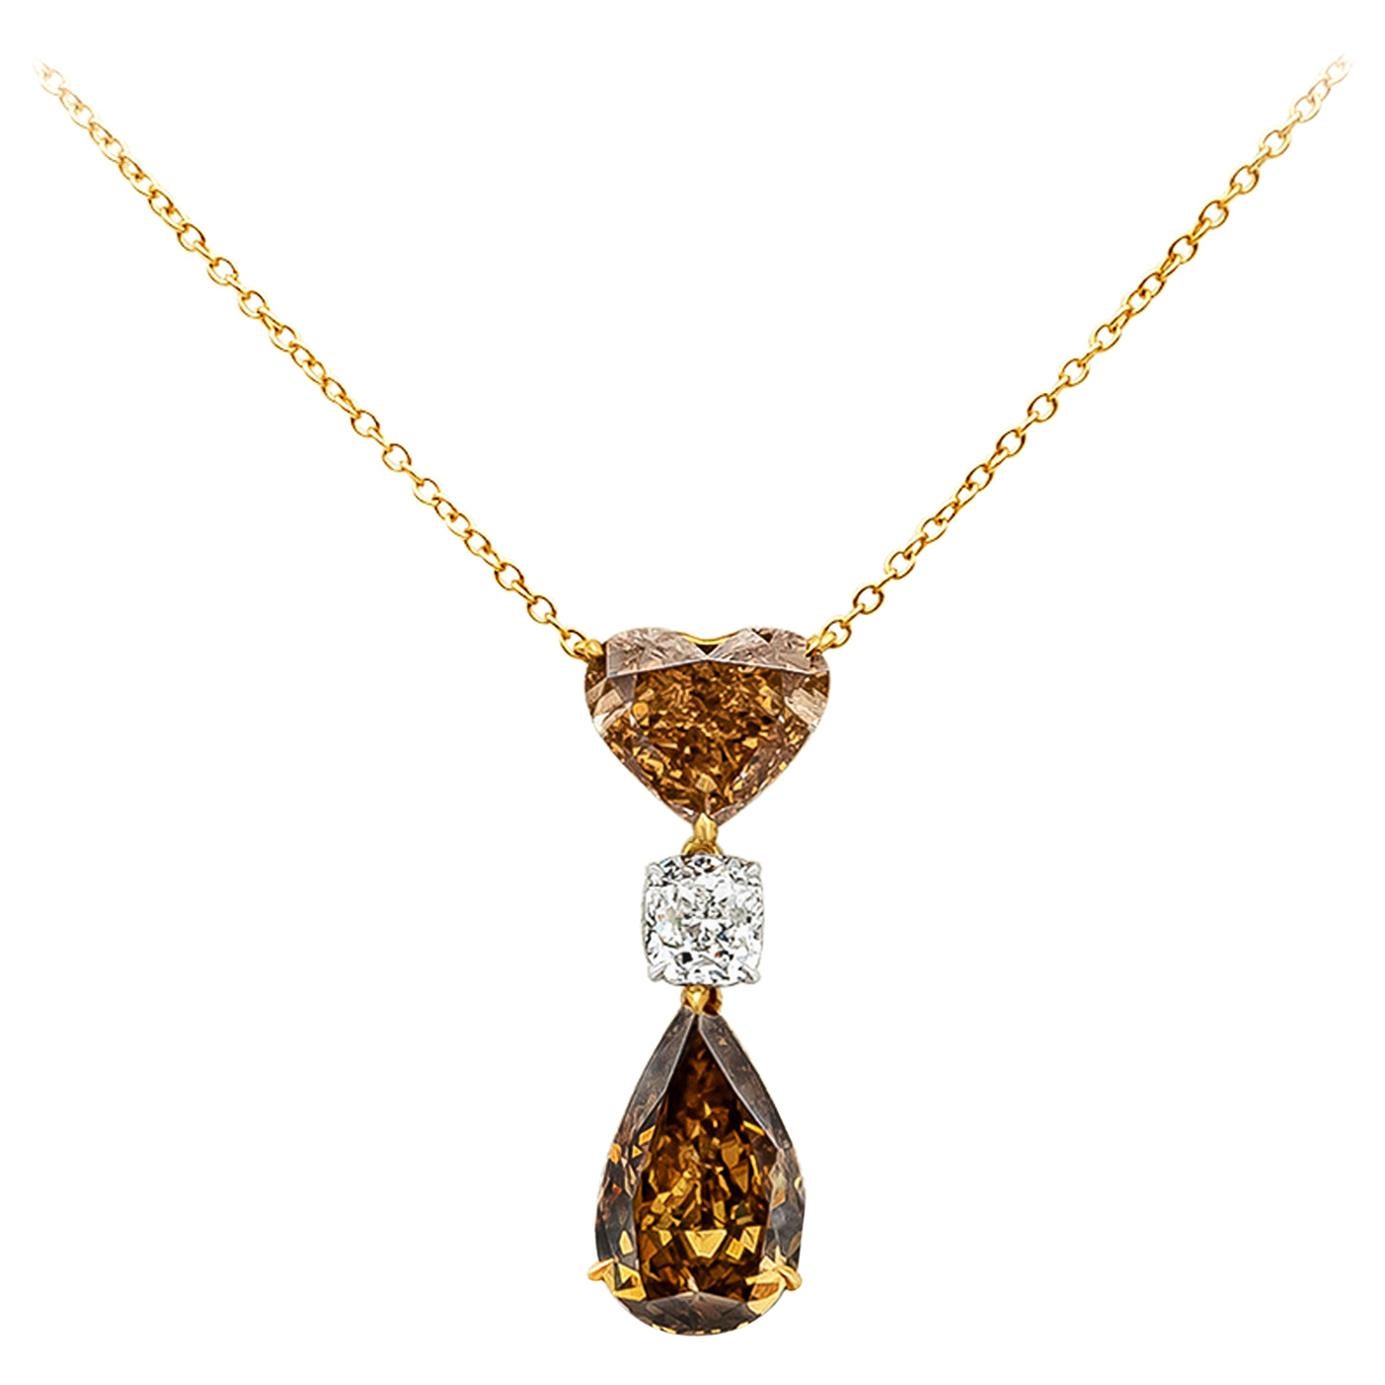 GIA Certified 9.29 Carats Total Mixed Cut Fancy Color Diamond Pendant Necklace